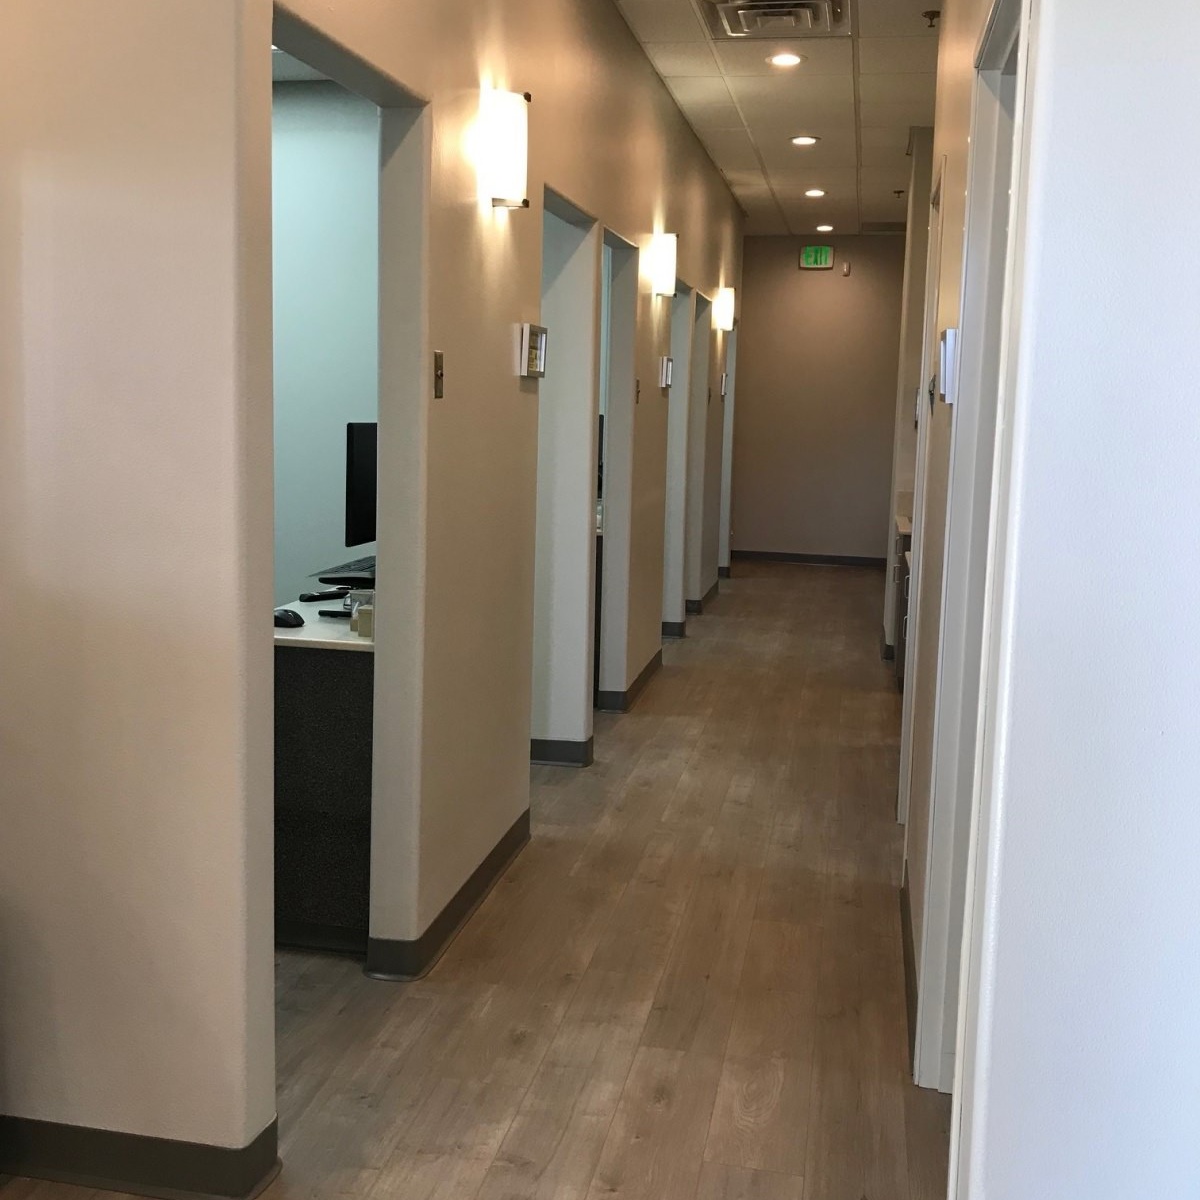 dental facility hallway completed by Dry Creek Construction